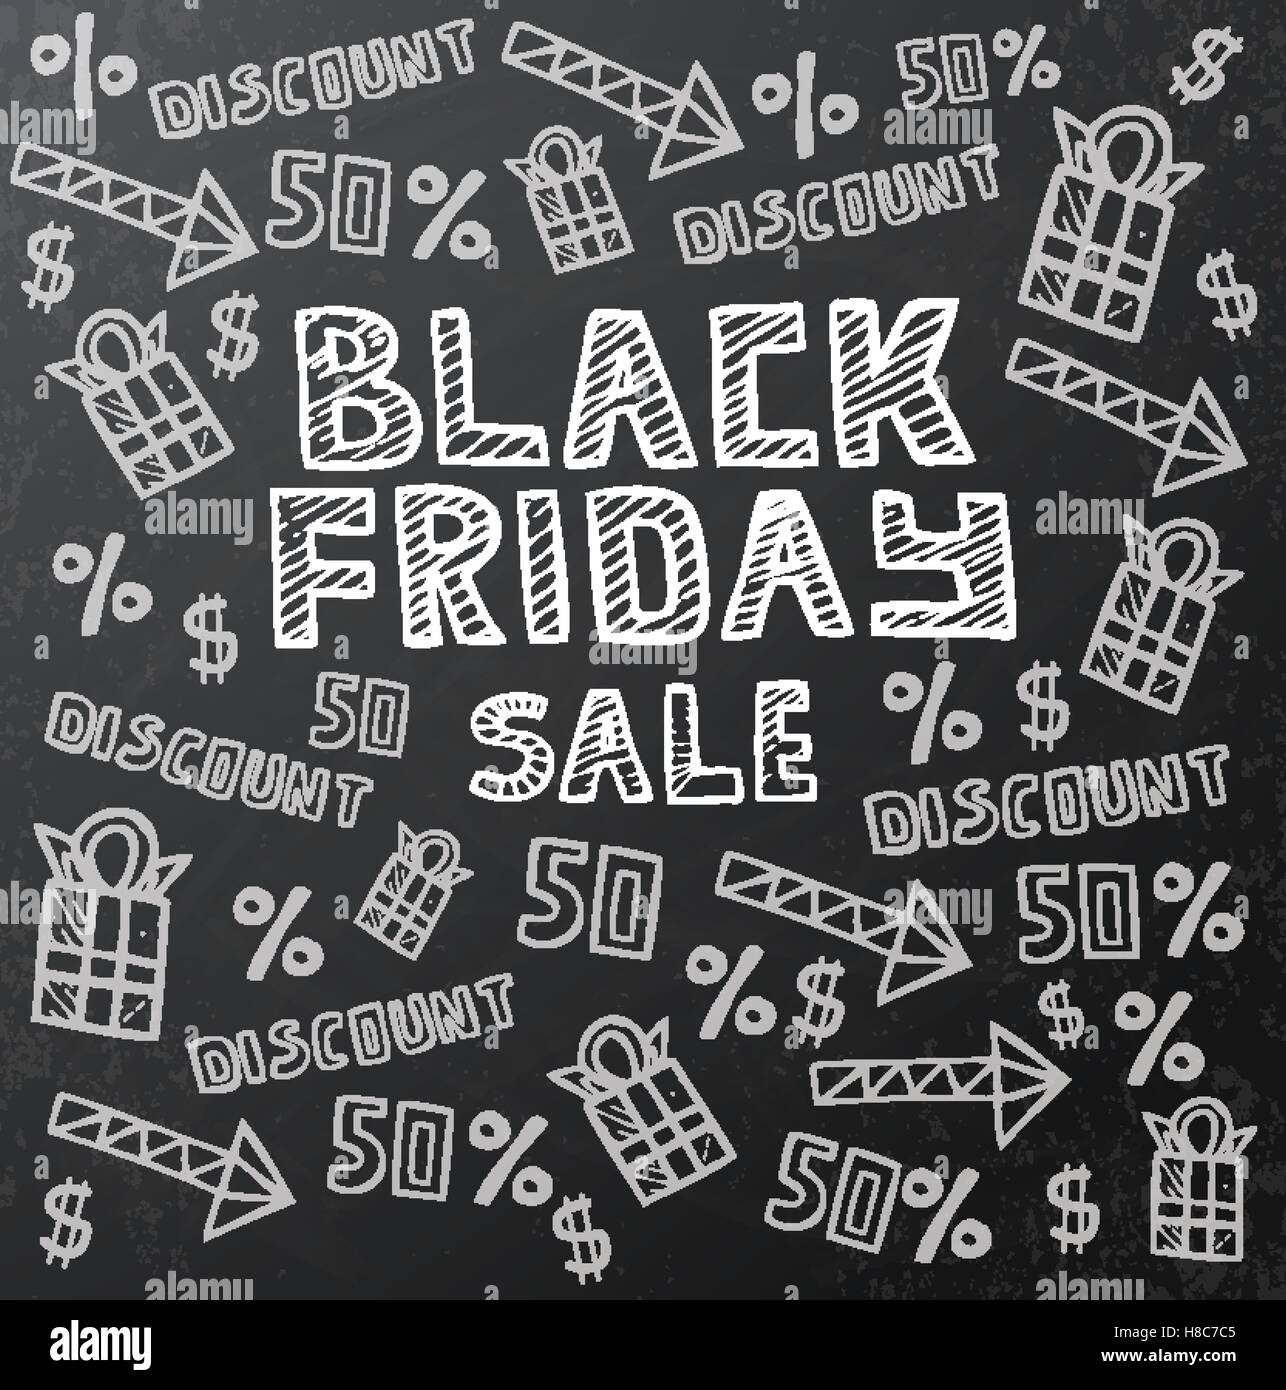 Black Friday Sale Background on Dark Chalkboard. Vector Illustration. Marketing Banner with Gift Box, Arrows and Dollar Sign. Stock Vector